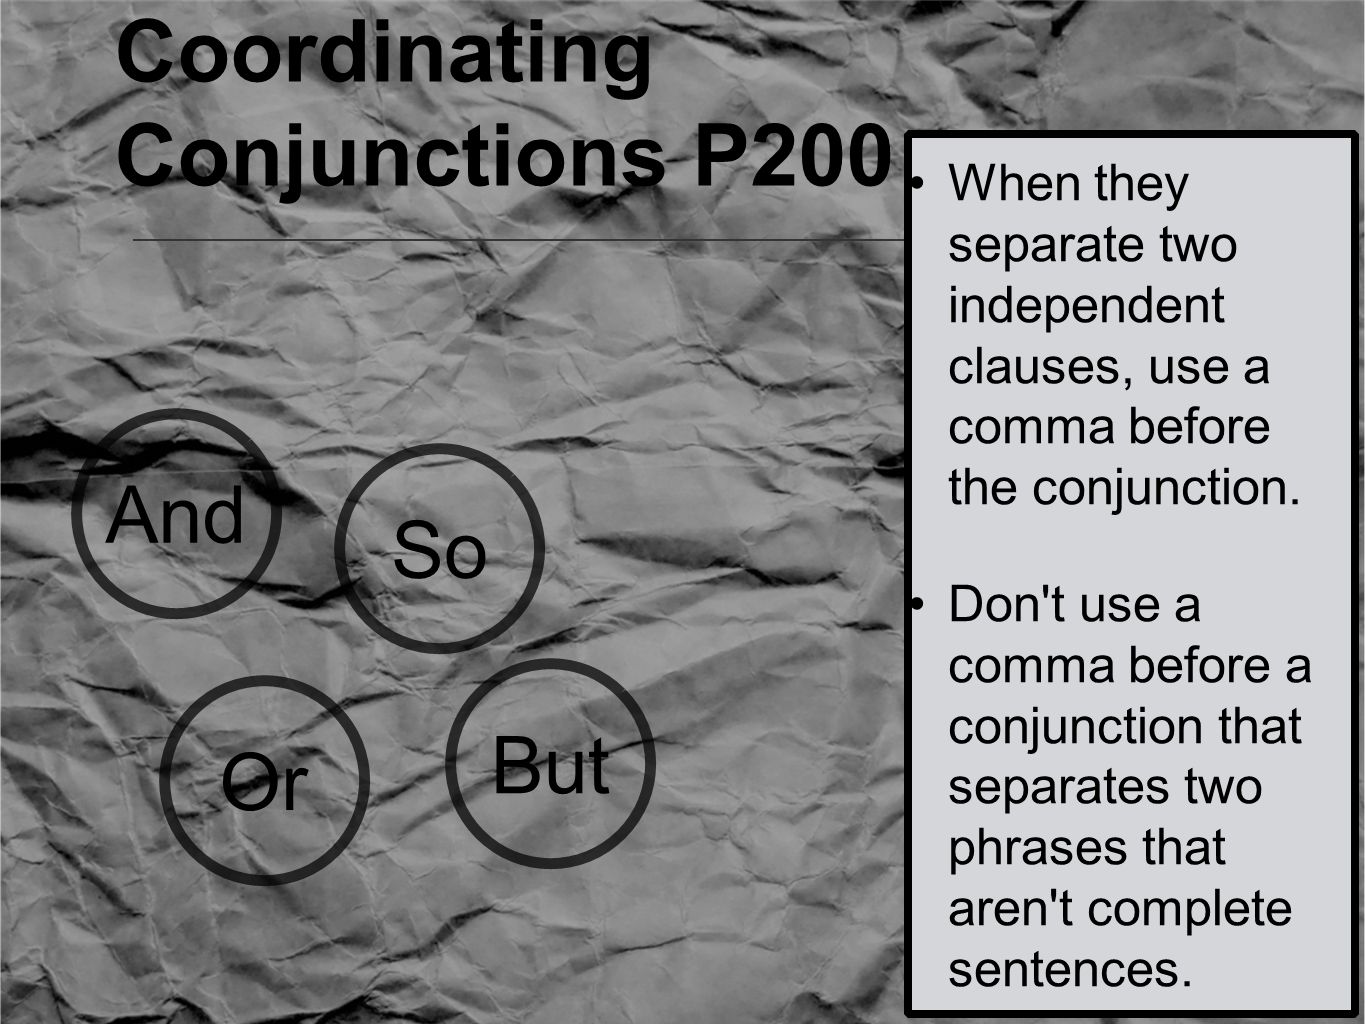 Coordinating Conjunctions P200 And Or But So When they separate two independent clauses, use a comma before the conjunction.